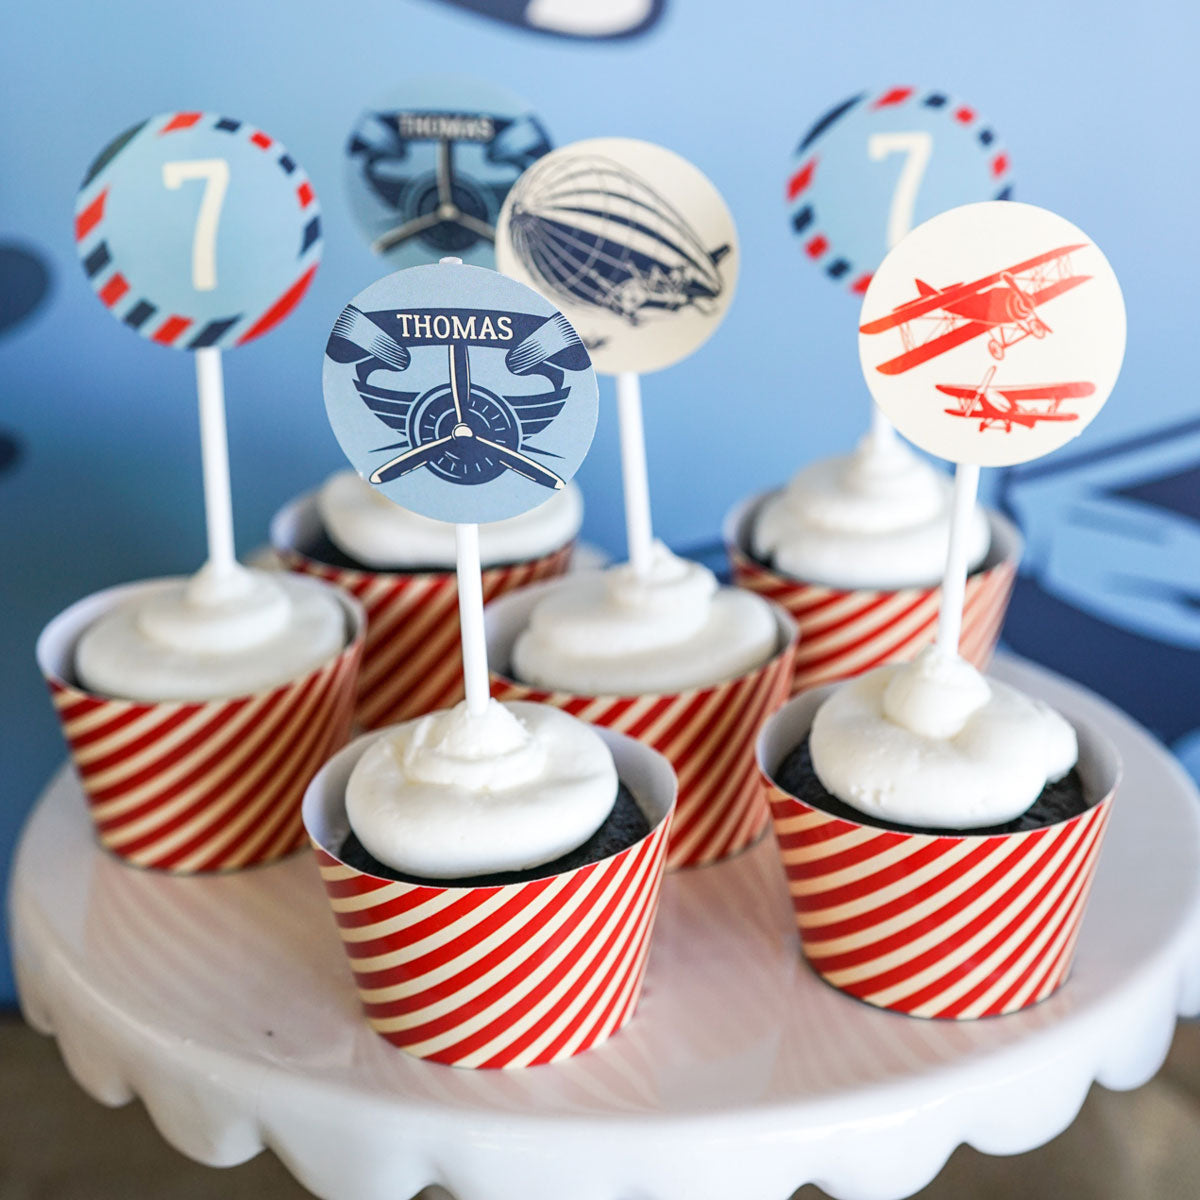 Blimp and Biplane Cupcake Toppers and Wrappers